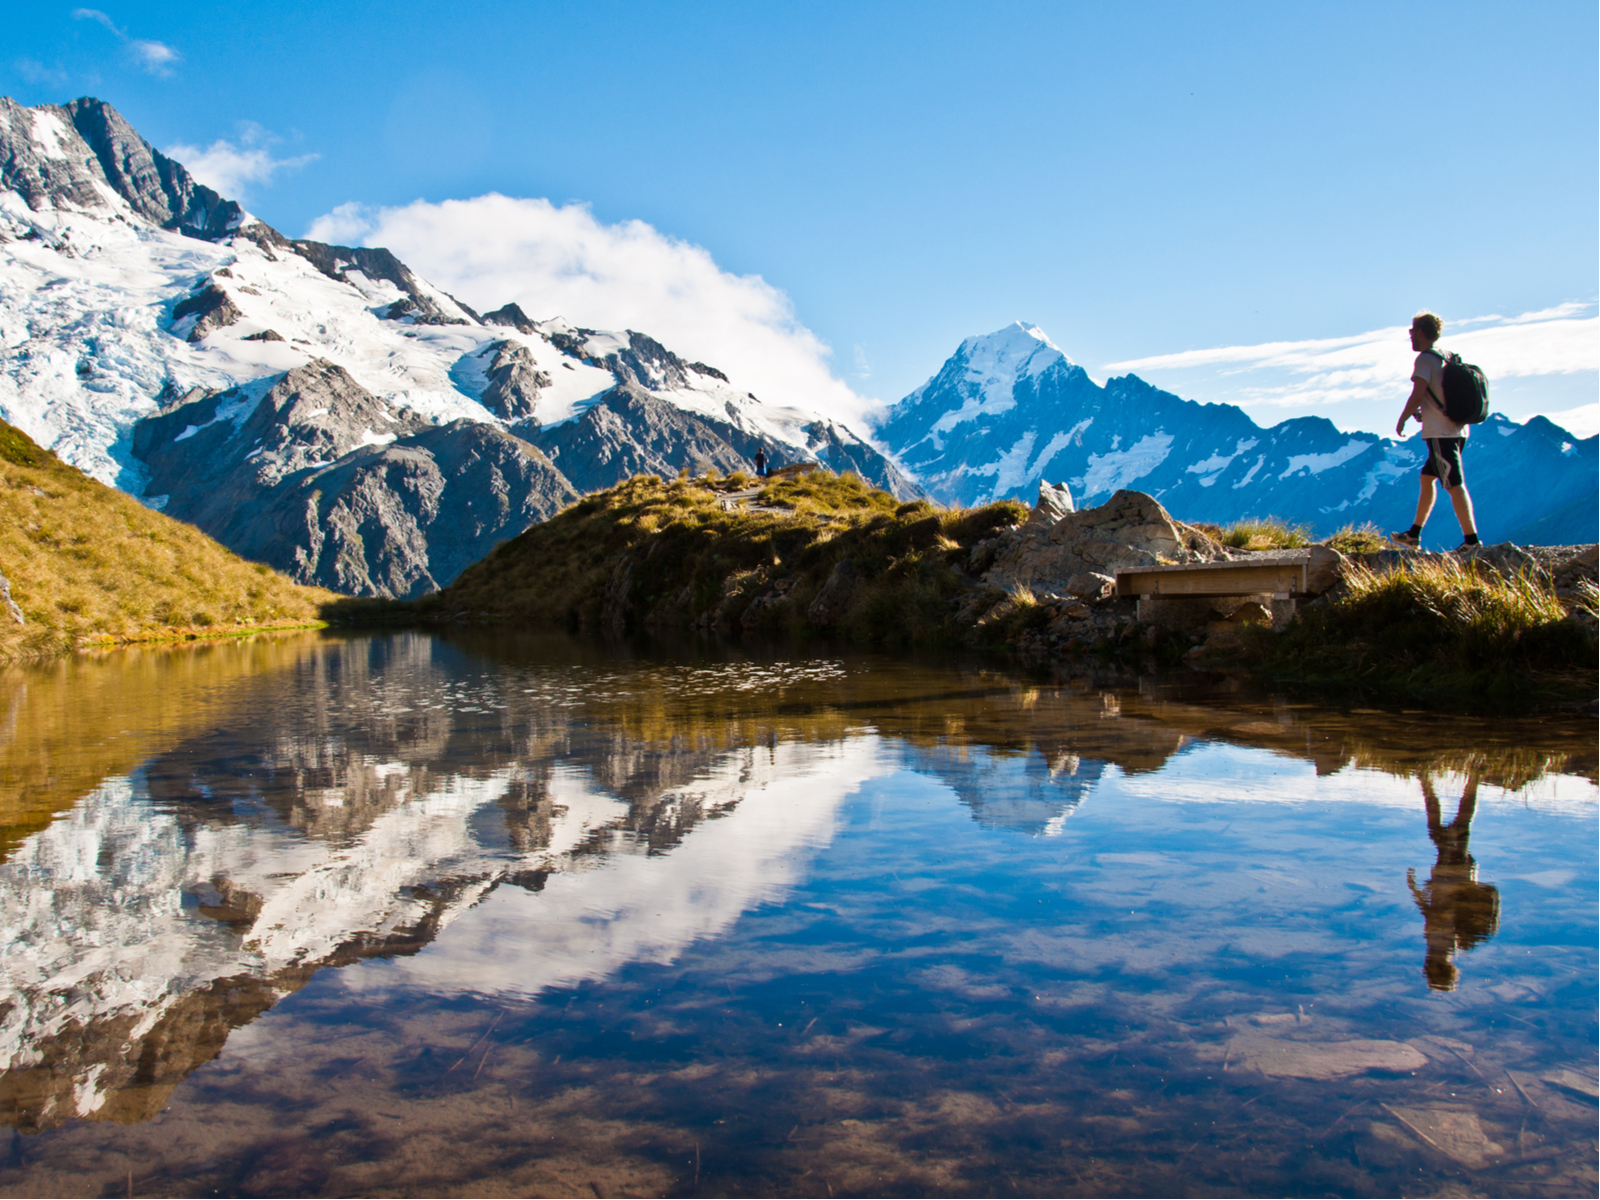 Guy hiking Mount Cook with a day pack and shorts standing in front of a pond with snow-capped mountains in the background